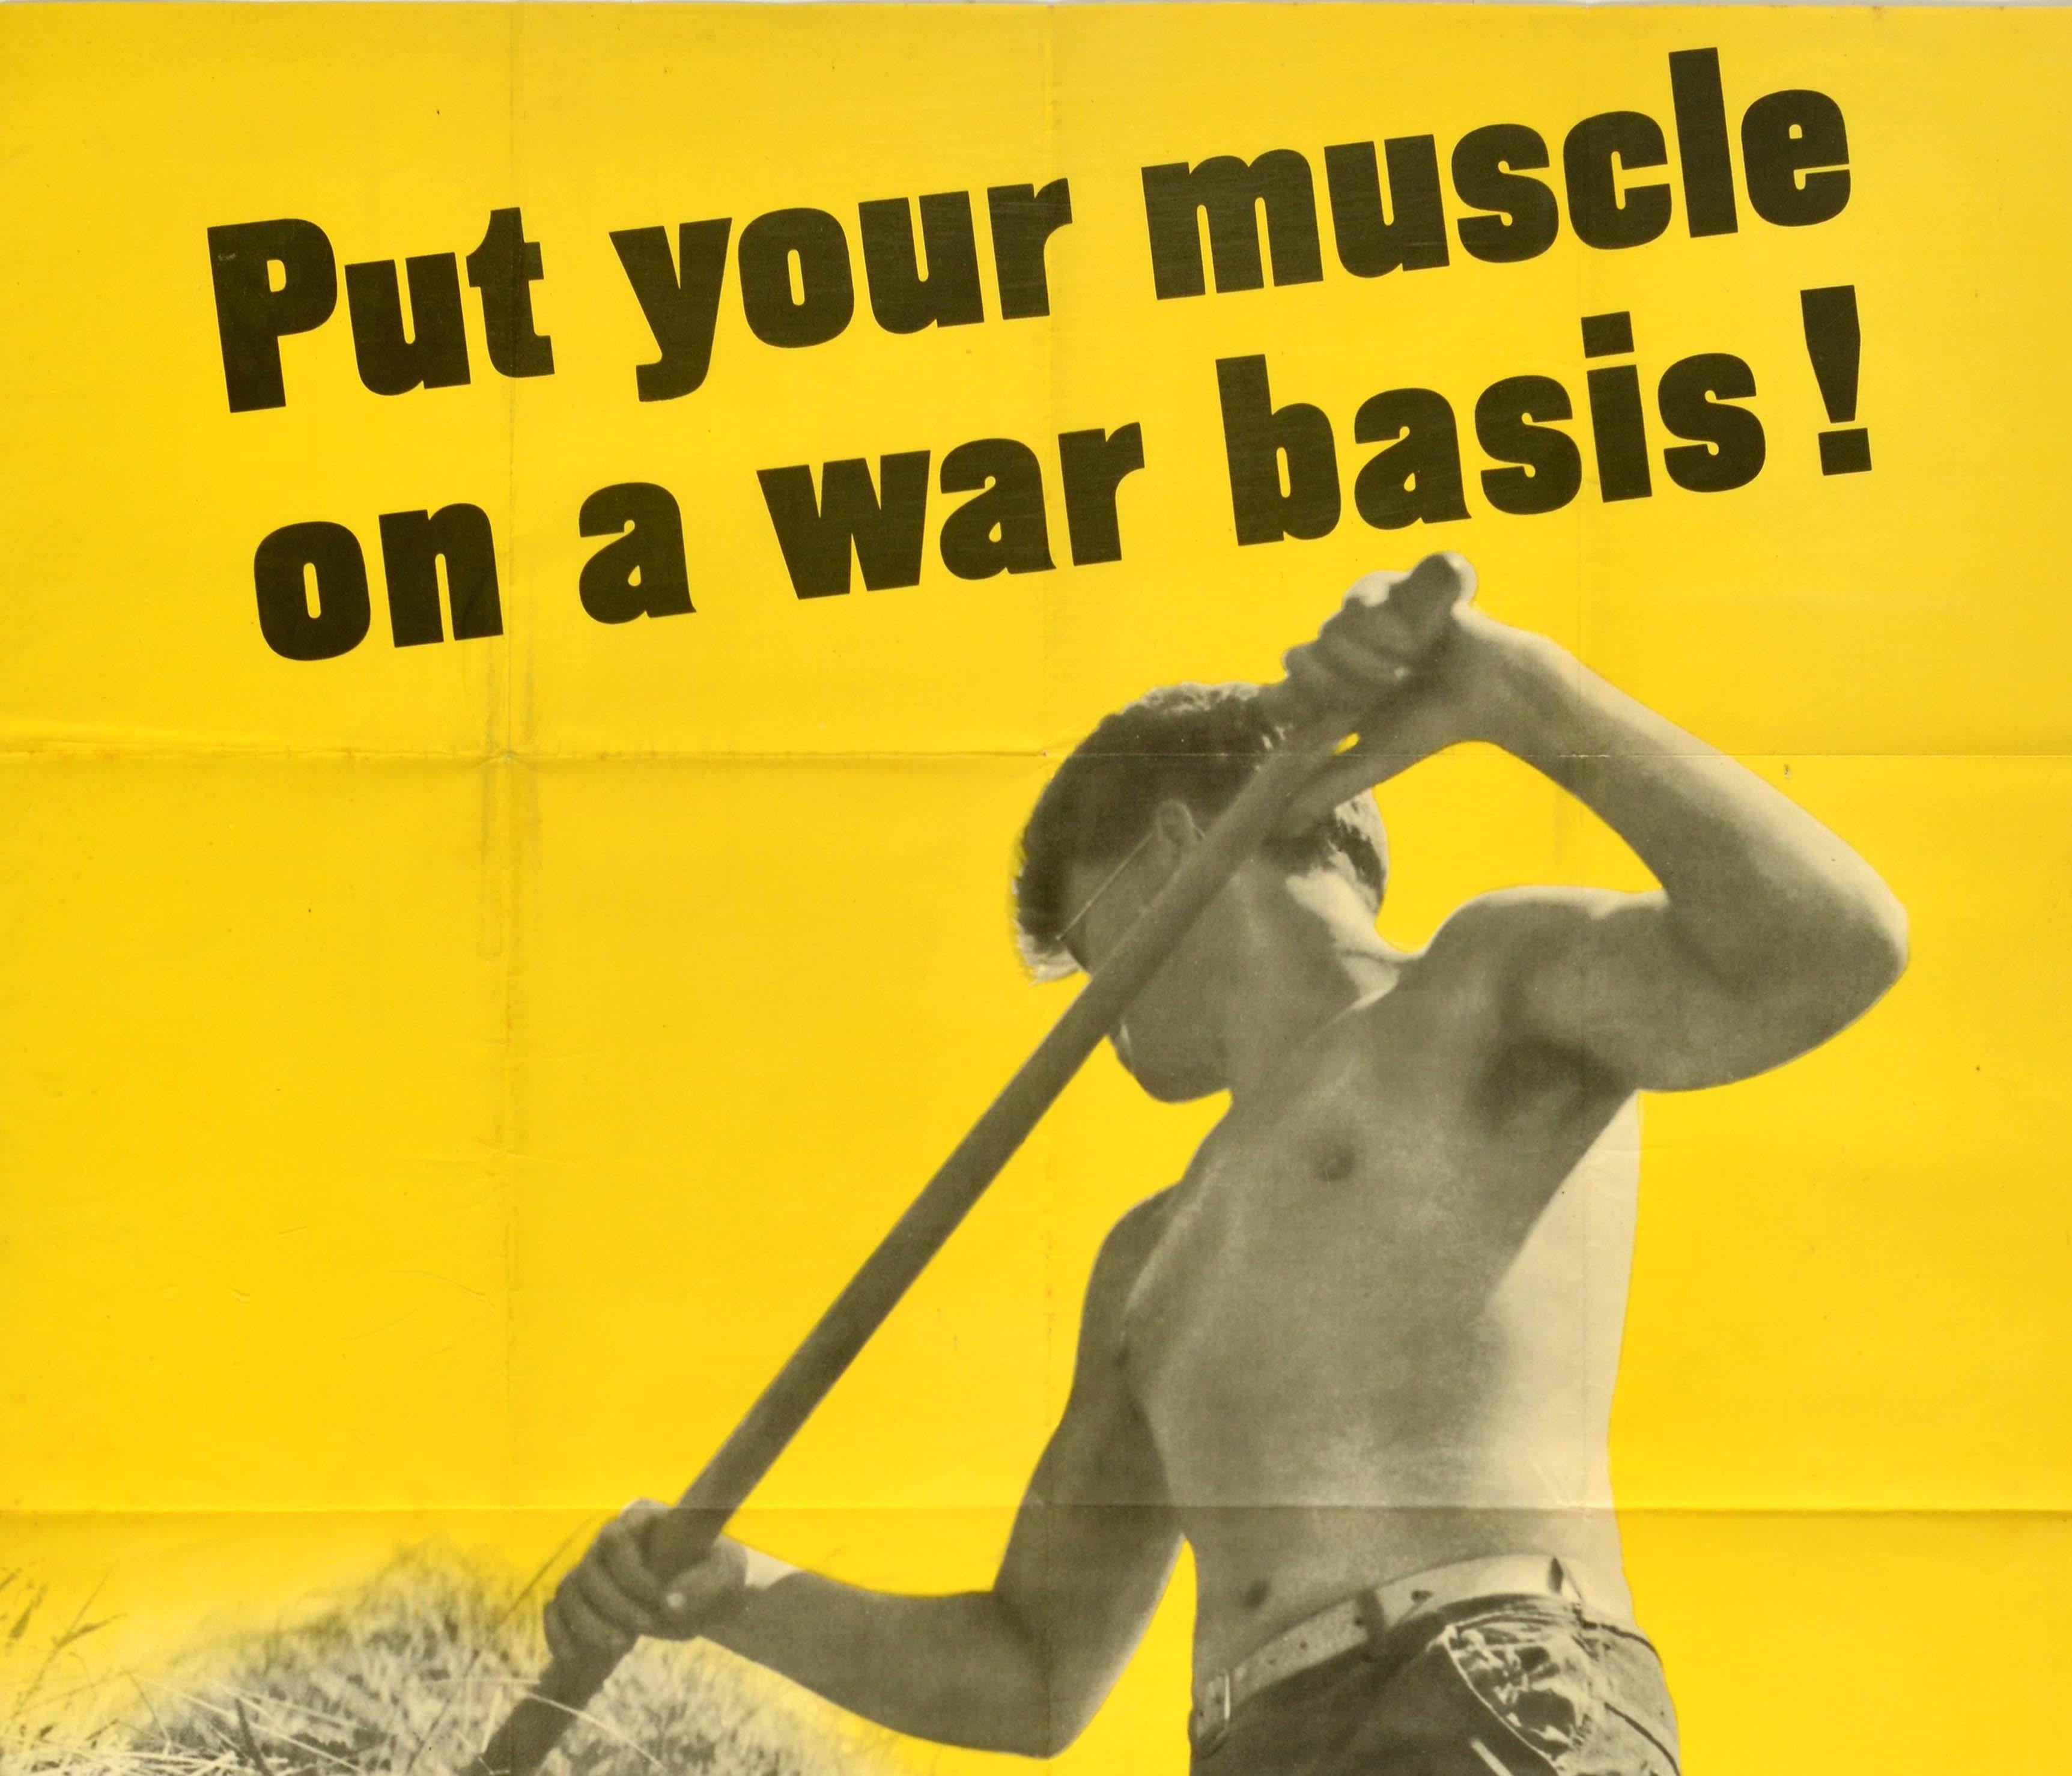 Original vintage World War Two home front propaganda poster - Put your muscle on a war basis! Sign up for a farm job - featuring a black and white photograph of a young man raking hay against a bright yellow background to show how civilians can